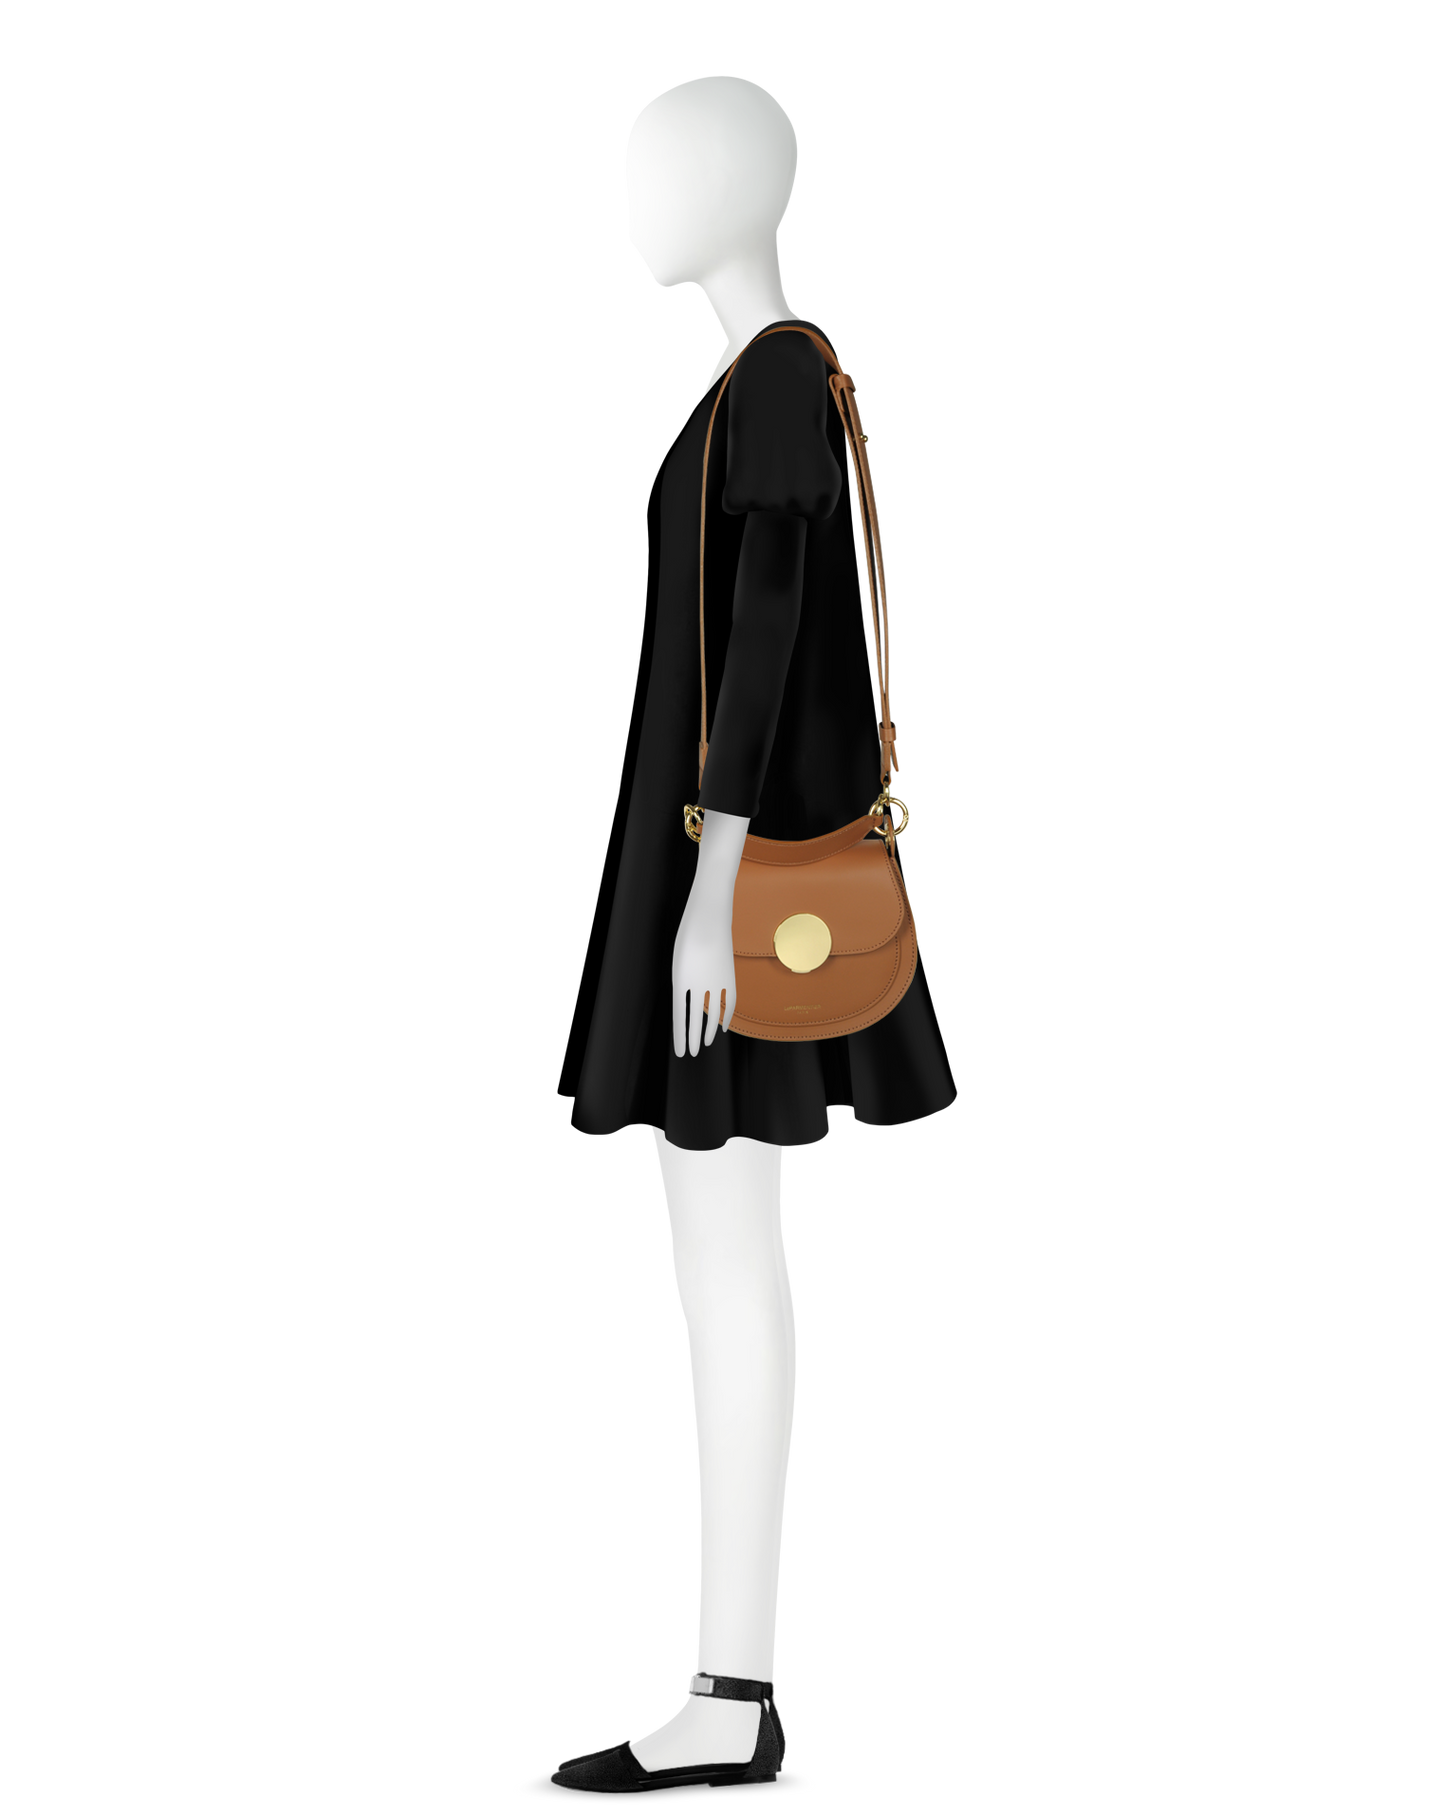 The Yucca Solo Shoulder Bag, from Le Parmentier at Mazzi d Fiori, is made of smooth genuine Italian calf leather and features a modern interpretation of the classic saddle silhouette. It is designed to keep you organised throughout the day and perfect for casual fun nights. The bag includes a top handle, a flap top with a magnetic snap closure and bold hardware detail. There is also a pocket under the flap for additional storage. The wide shoulder strap is adjustable for your comfort. 